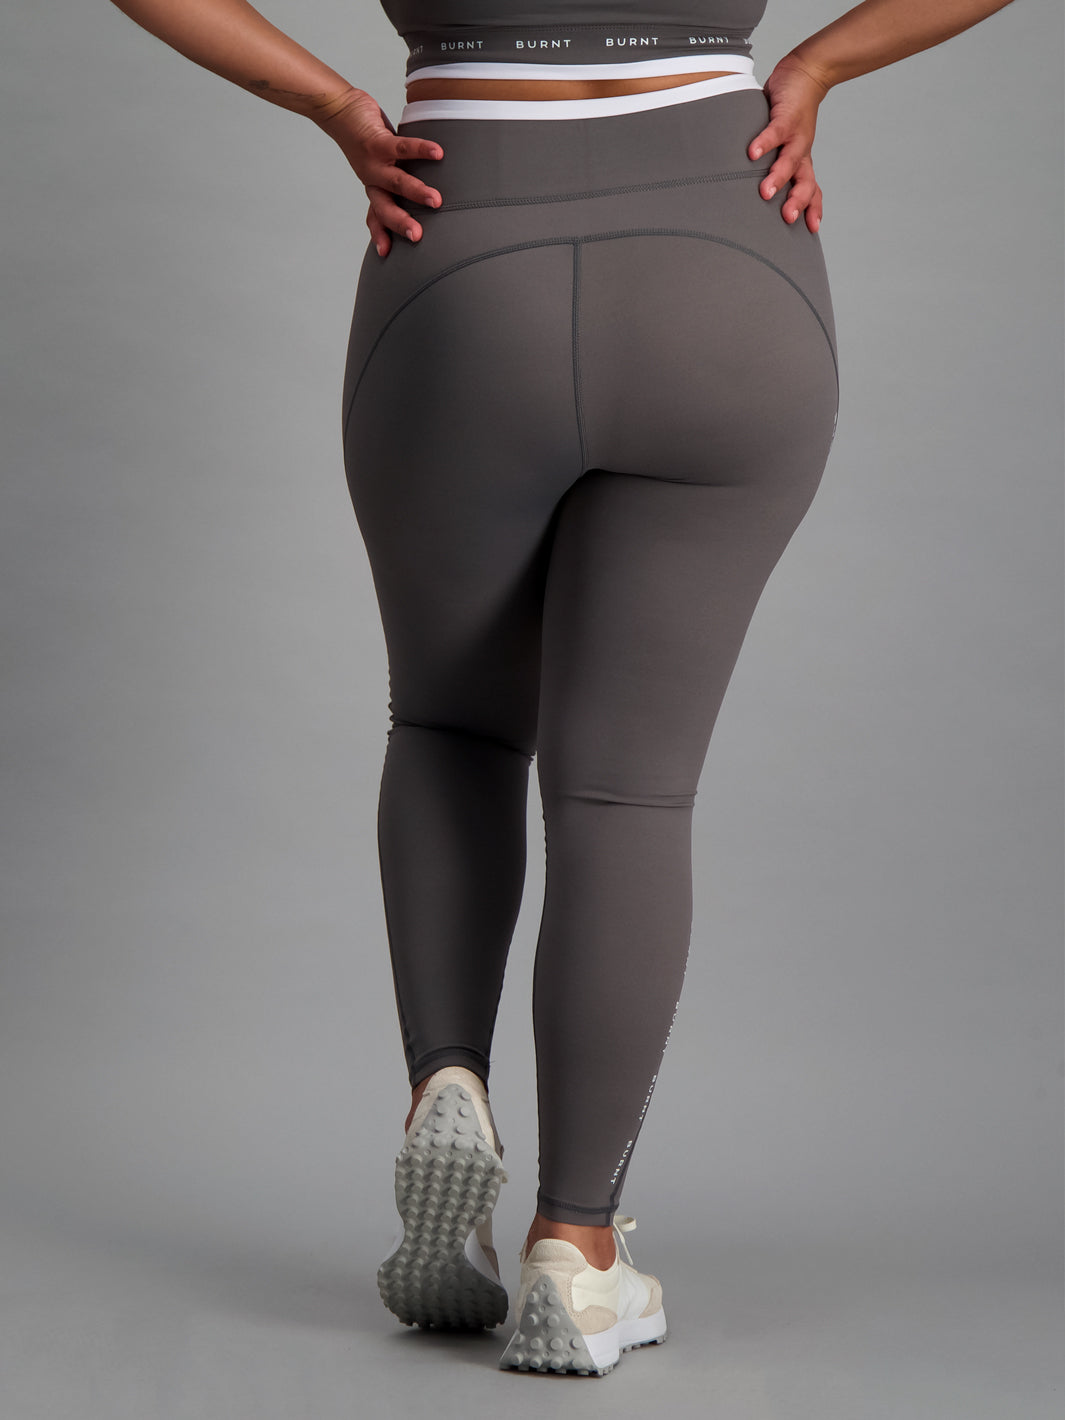 Chelsea Tights - Charcoal Grey